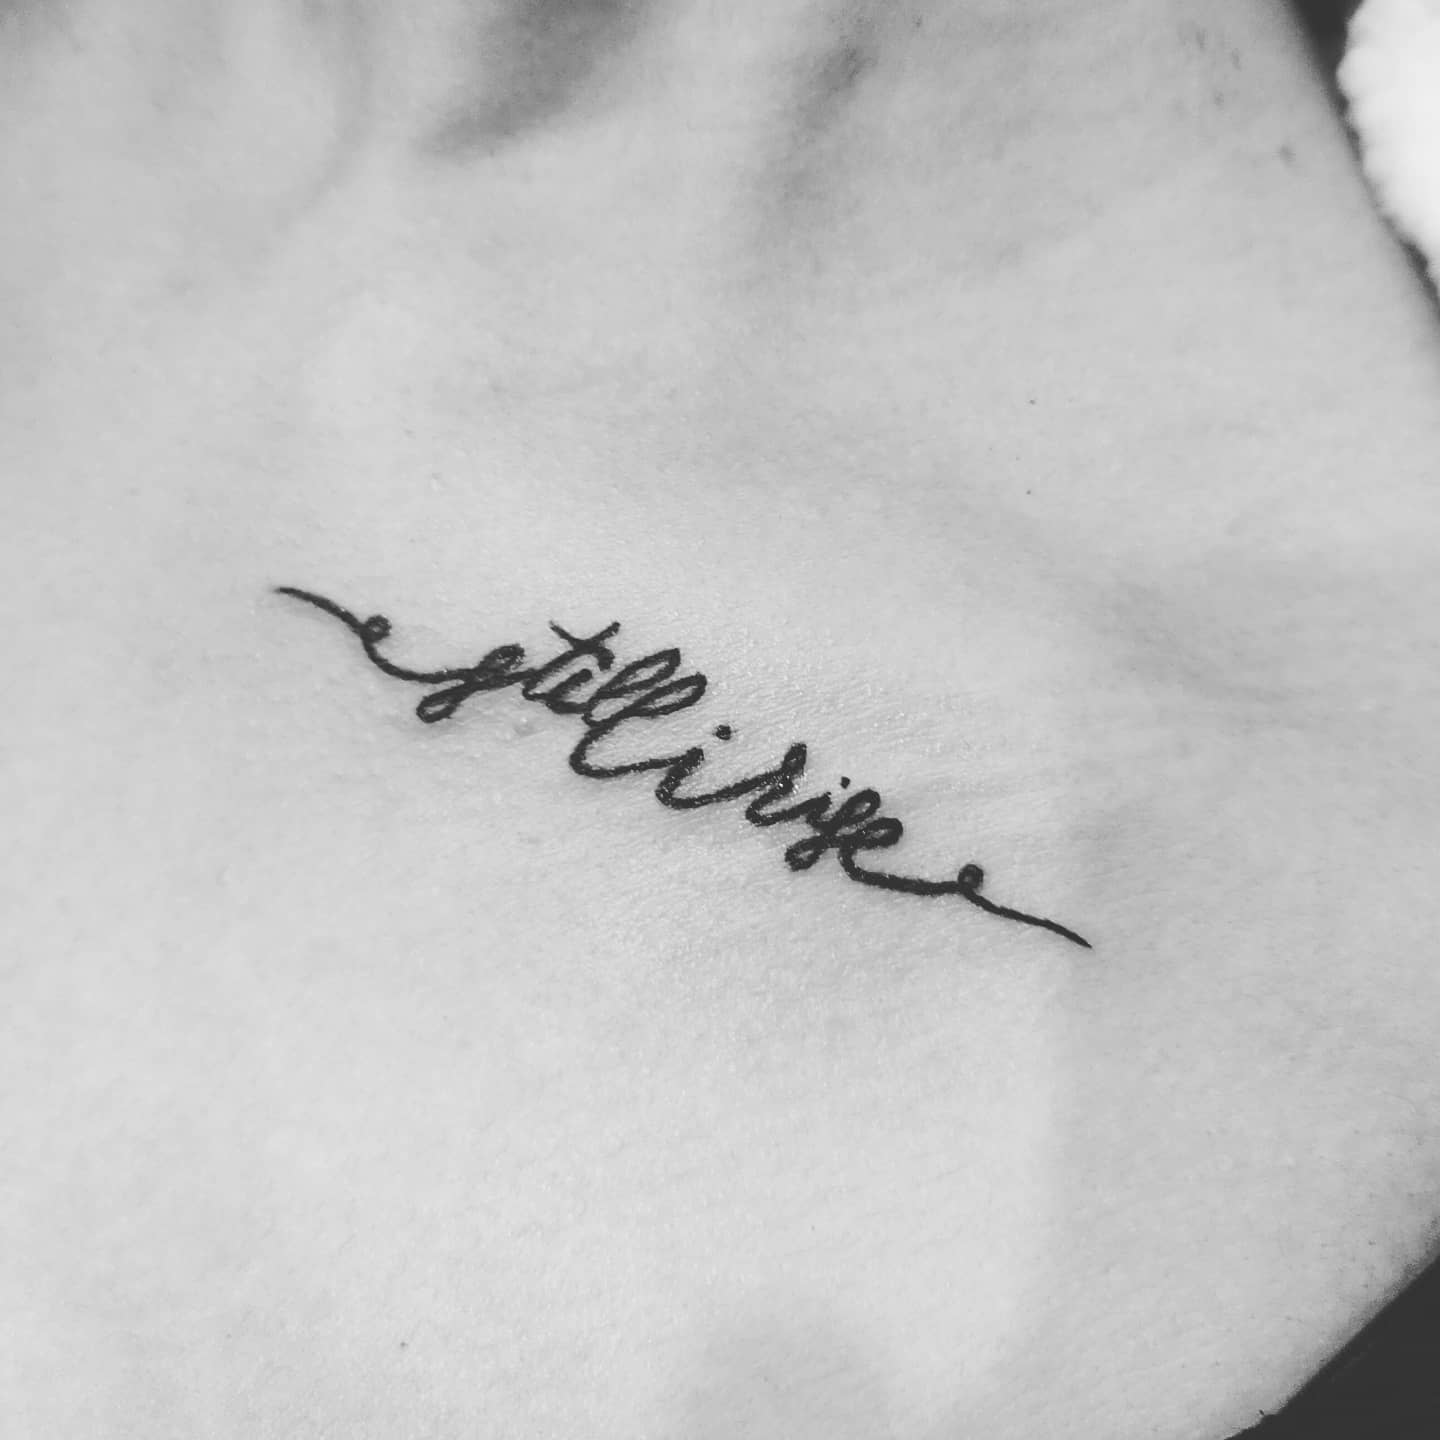 Pin by Rebeckaavital on tattoo  Still i rise tattoo Tattoos with meaning  Tattoos